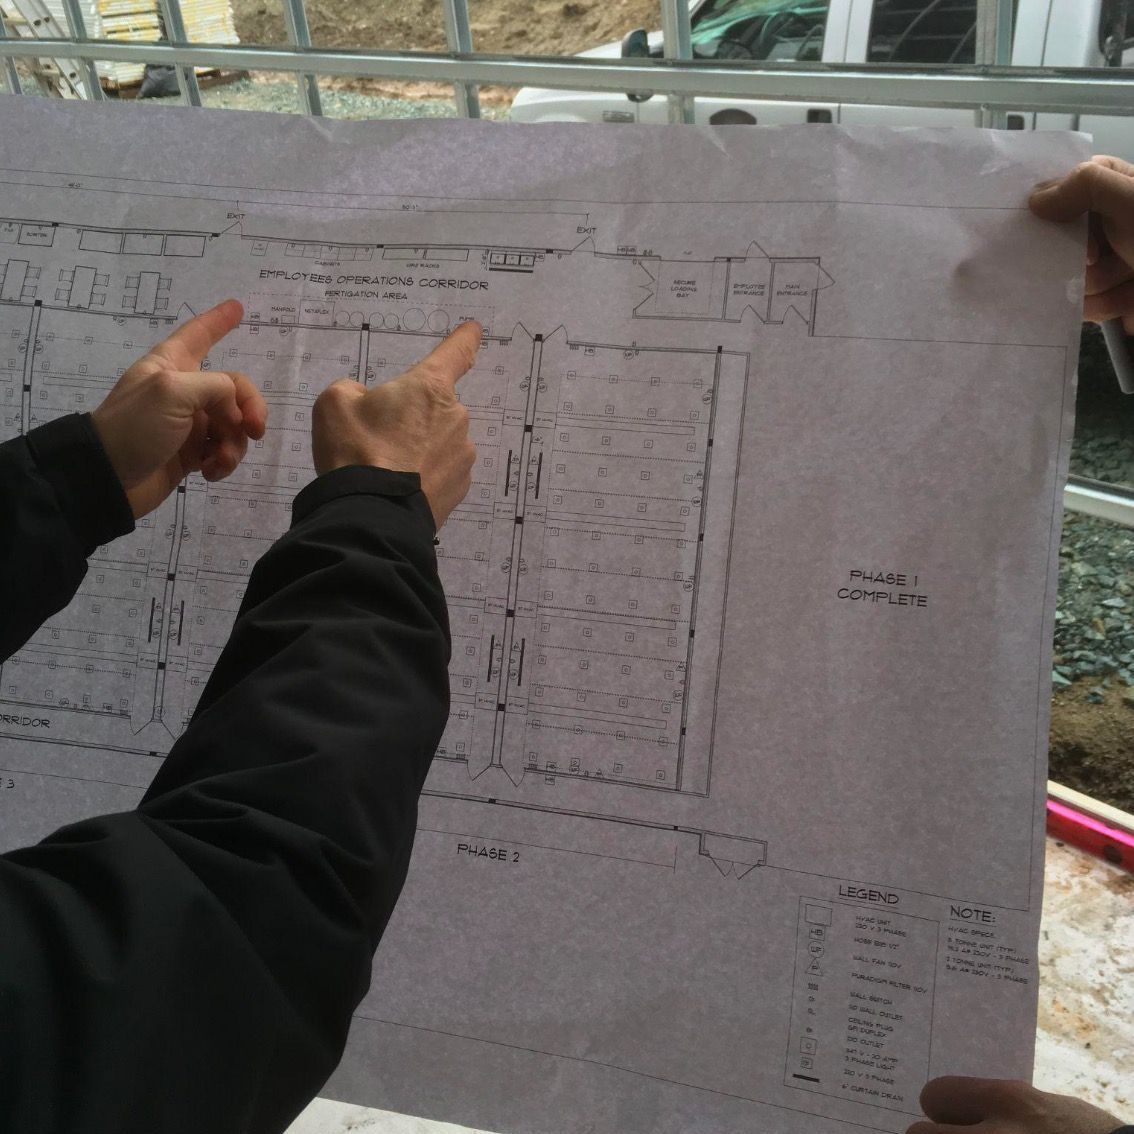 Jason from Otm Systems pointing at the security system drawing he created for an outdoor site that needed a security system.